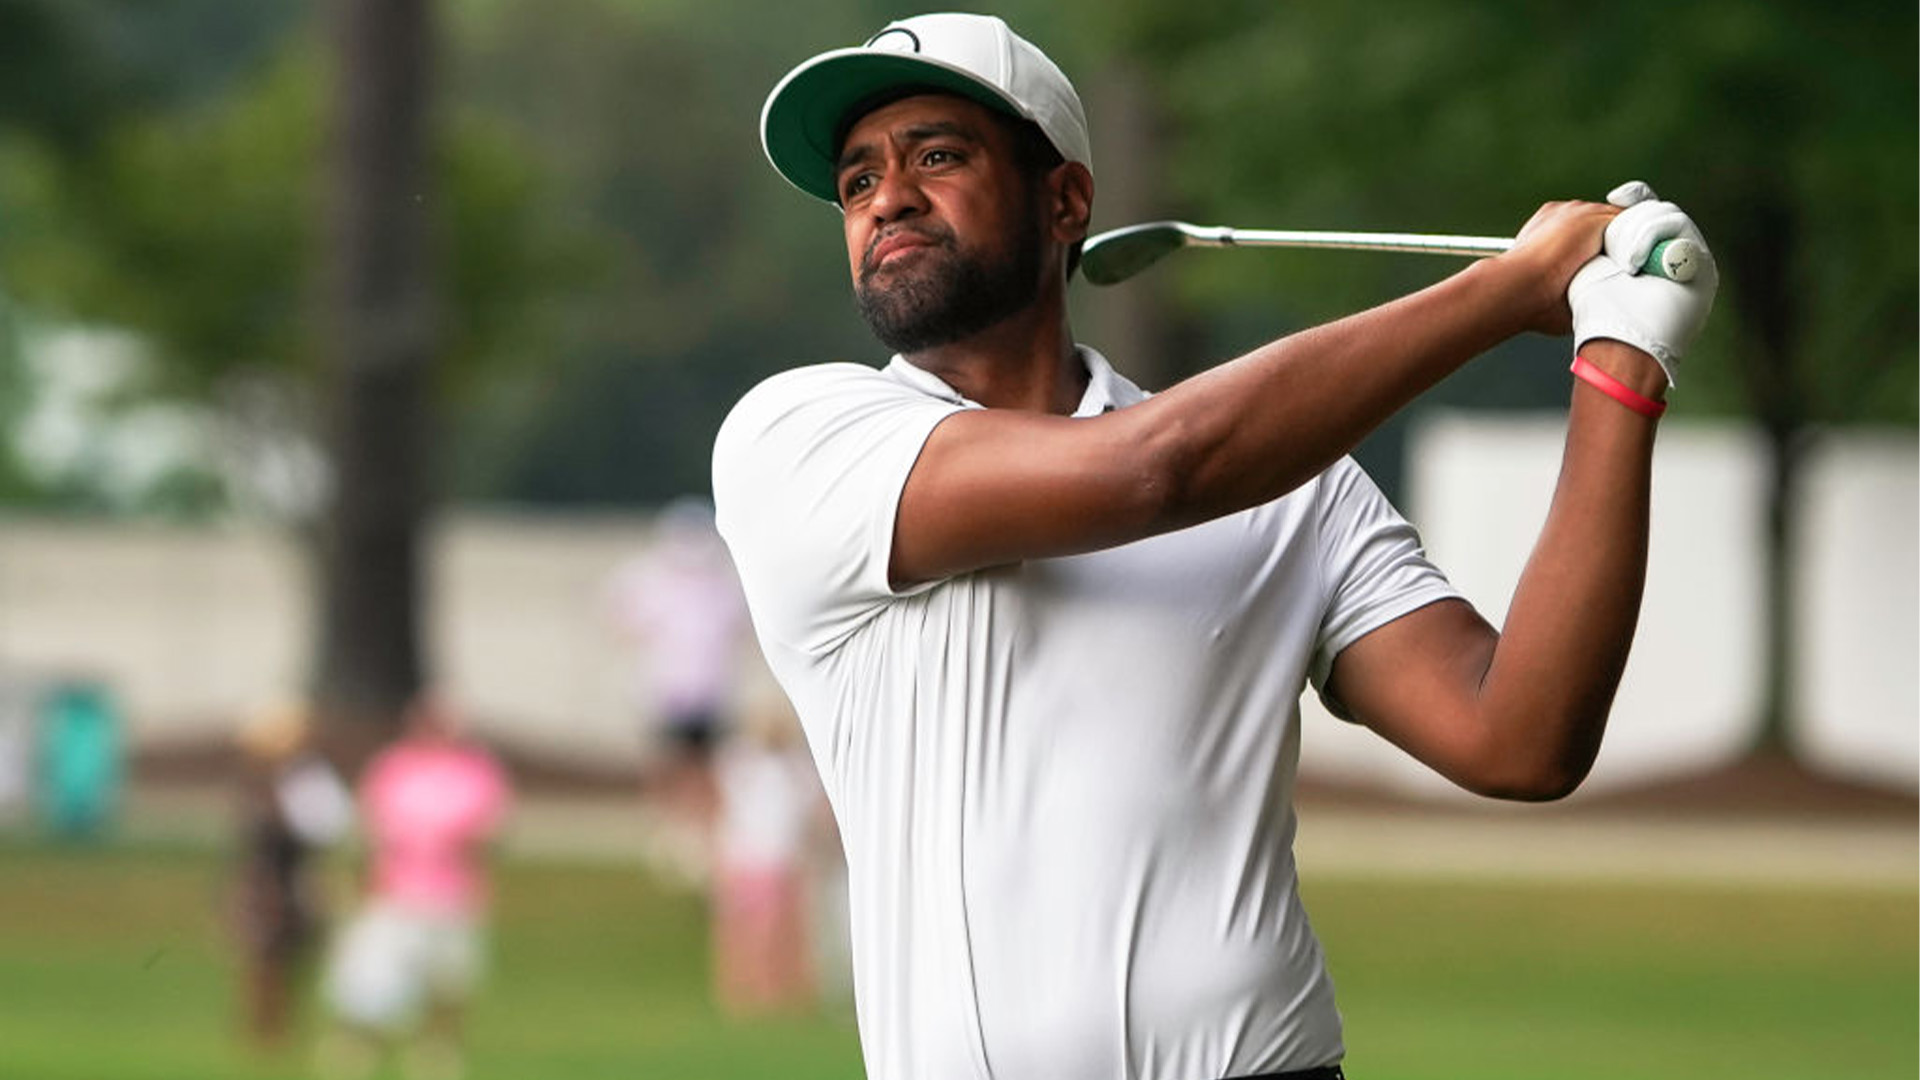 The PGA Tour Receives Backlash For Its AI-Generated Images Of Golfers Of Color